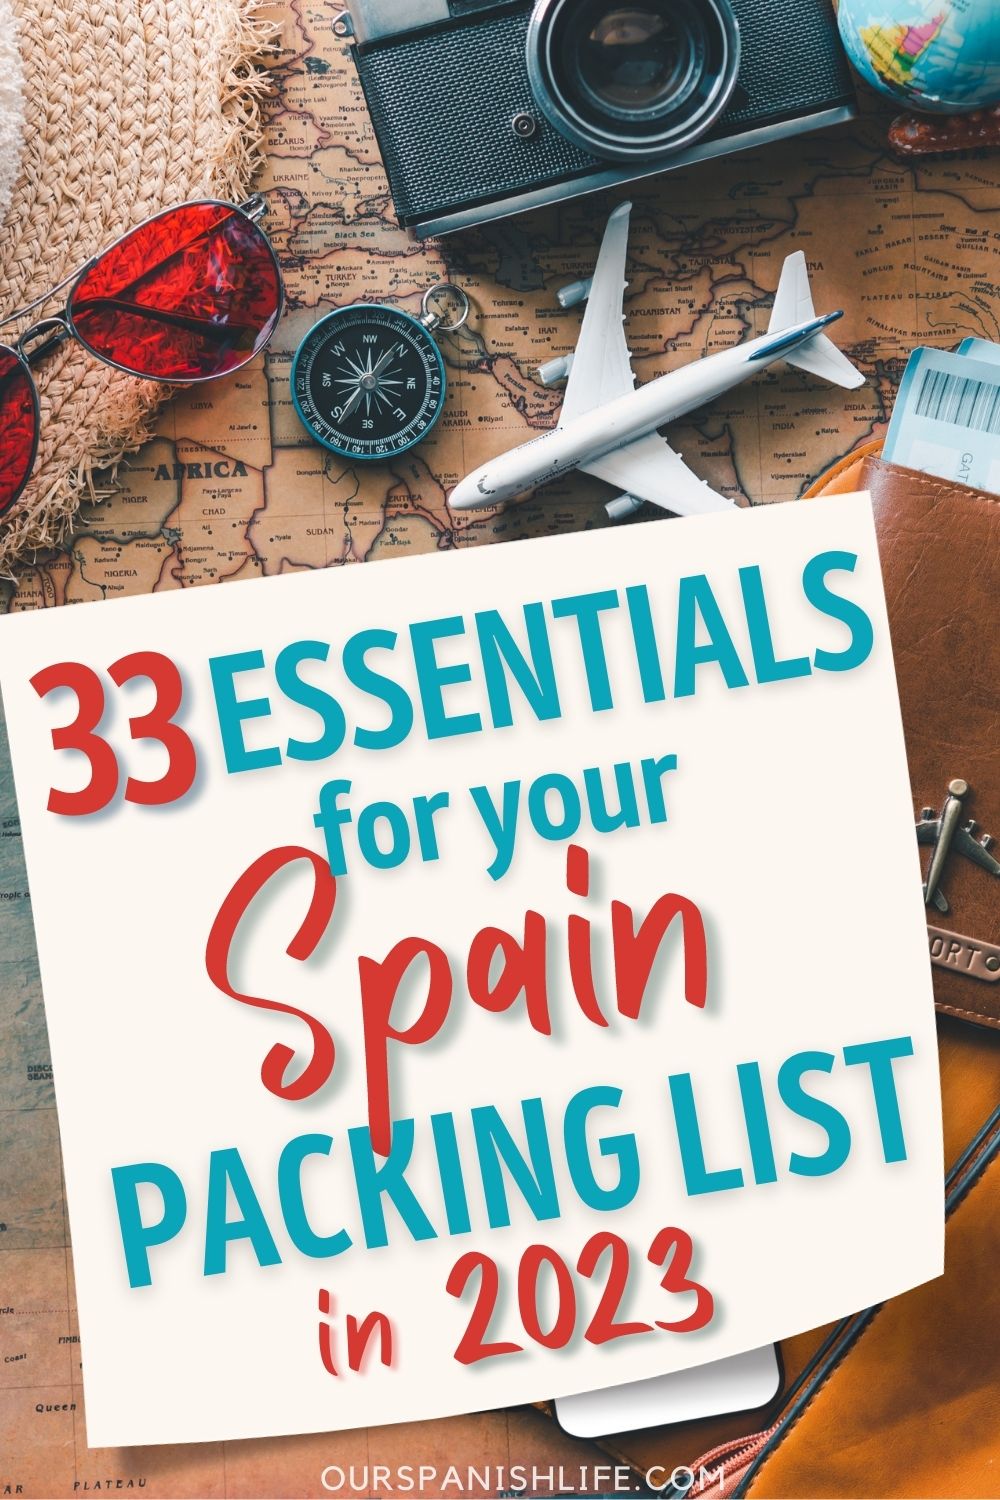 33 Essentials for Your Spain Packing List in 2023 Pin Image